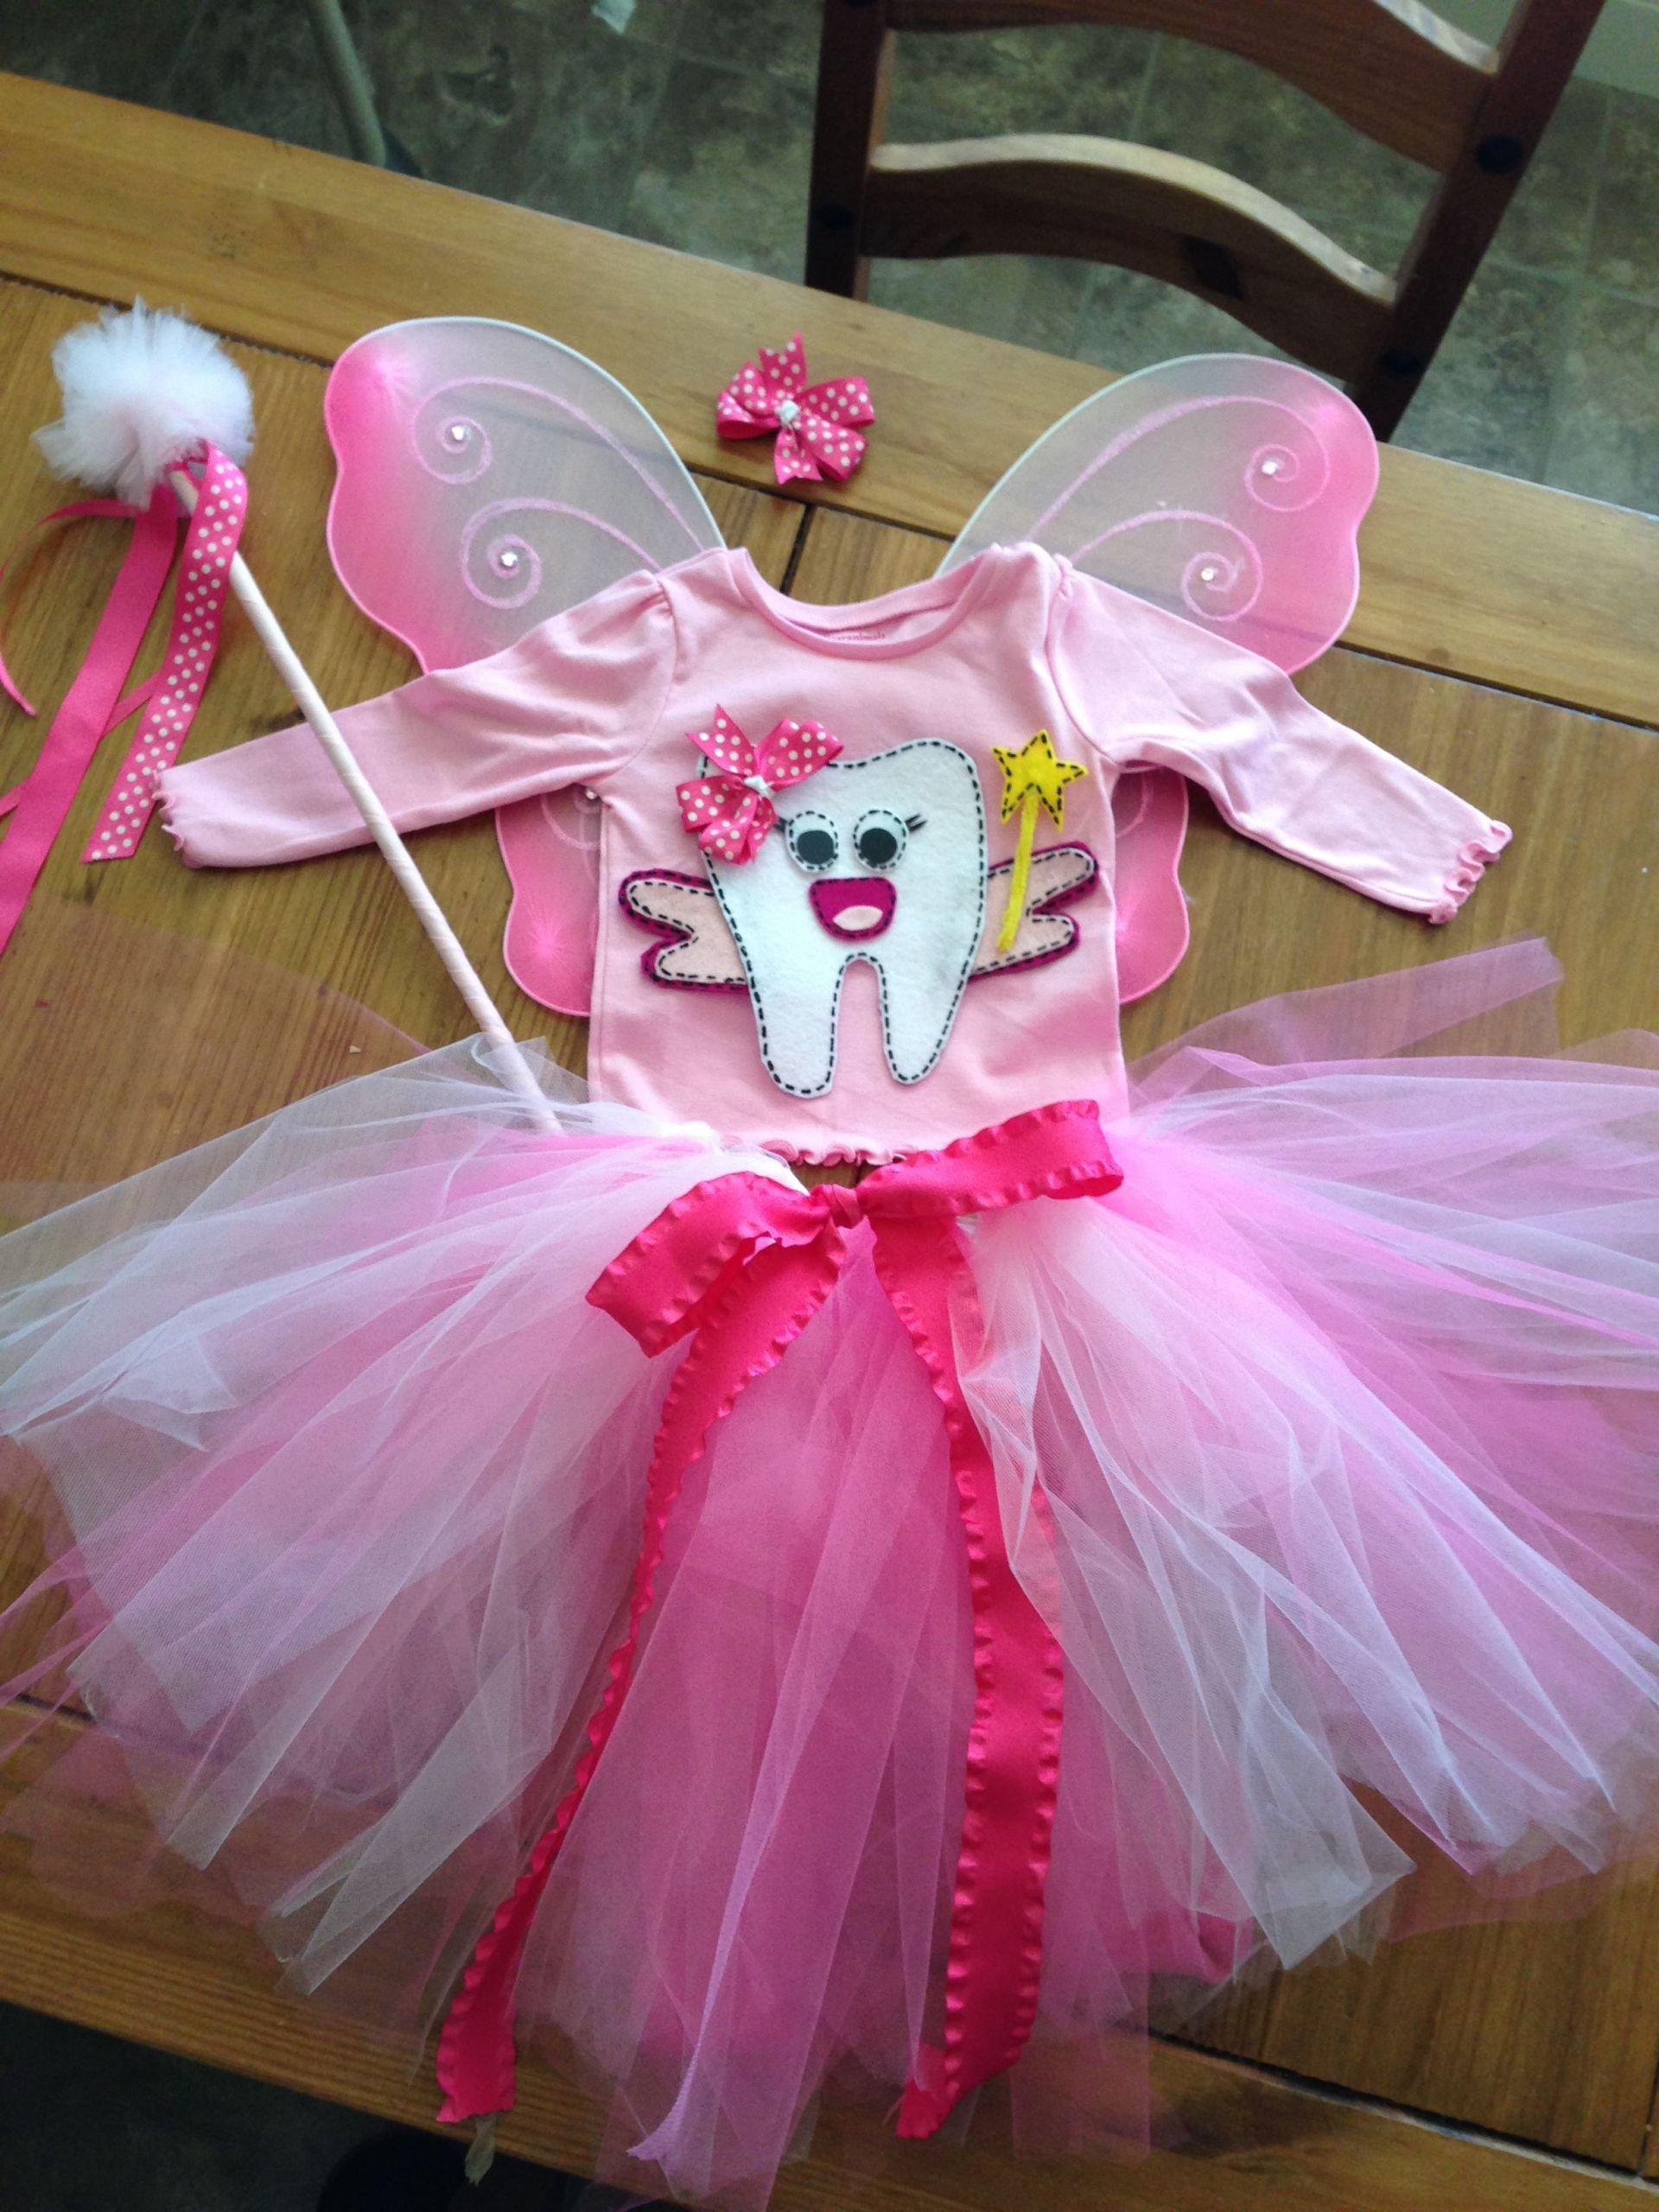 Tooth Fairy Costume DIY
 Afton s tooth fairy costume